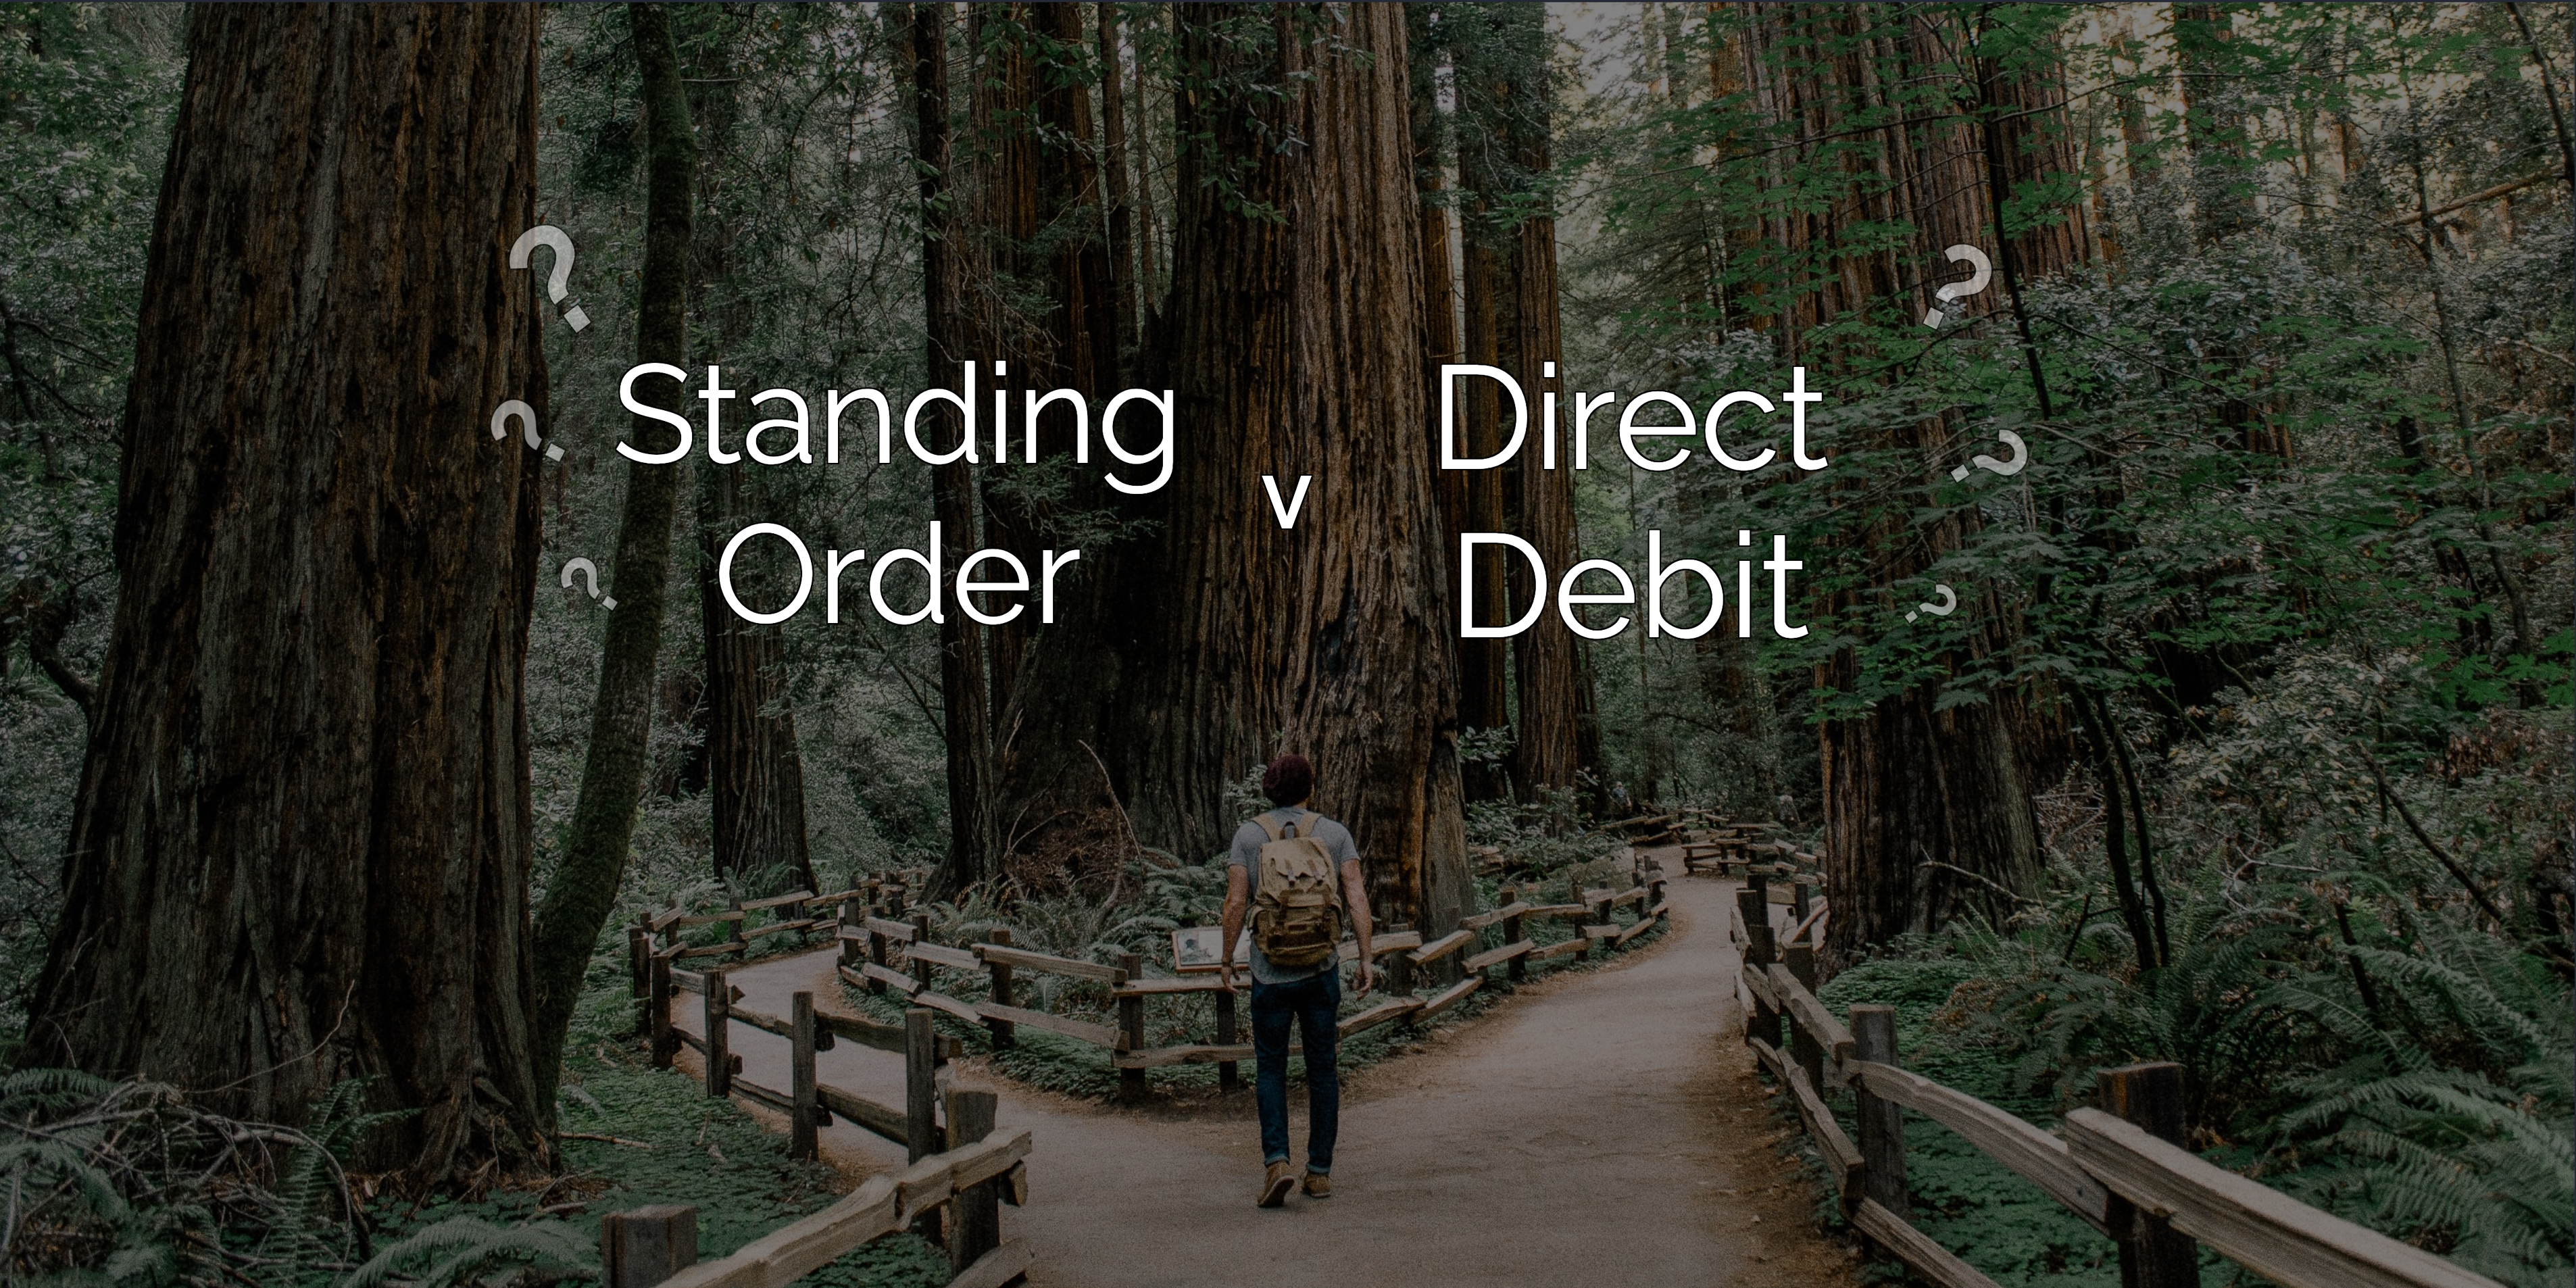 Standing Order Vs Direct Debit: Which is Best for your Business?